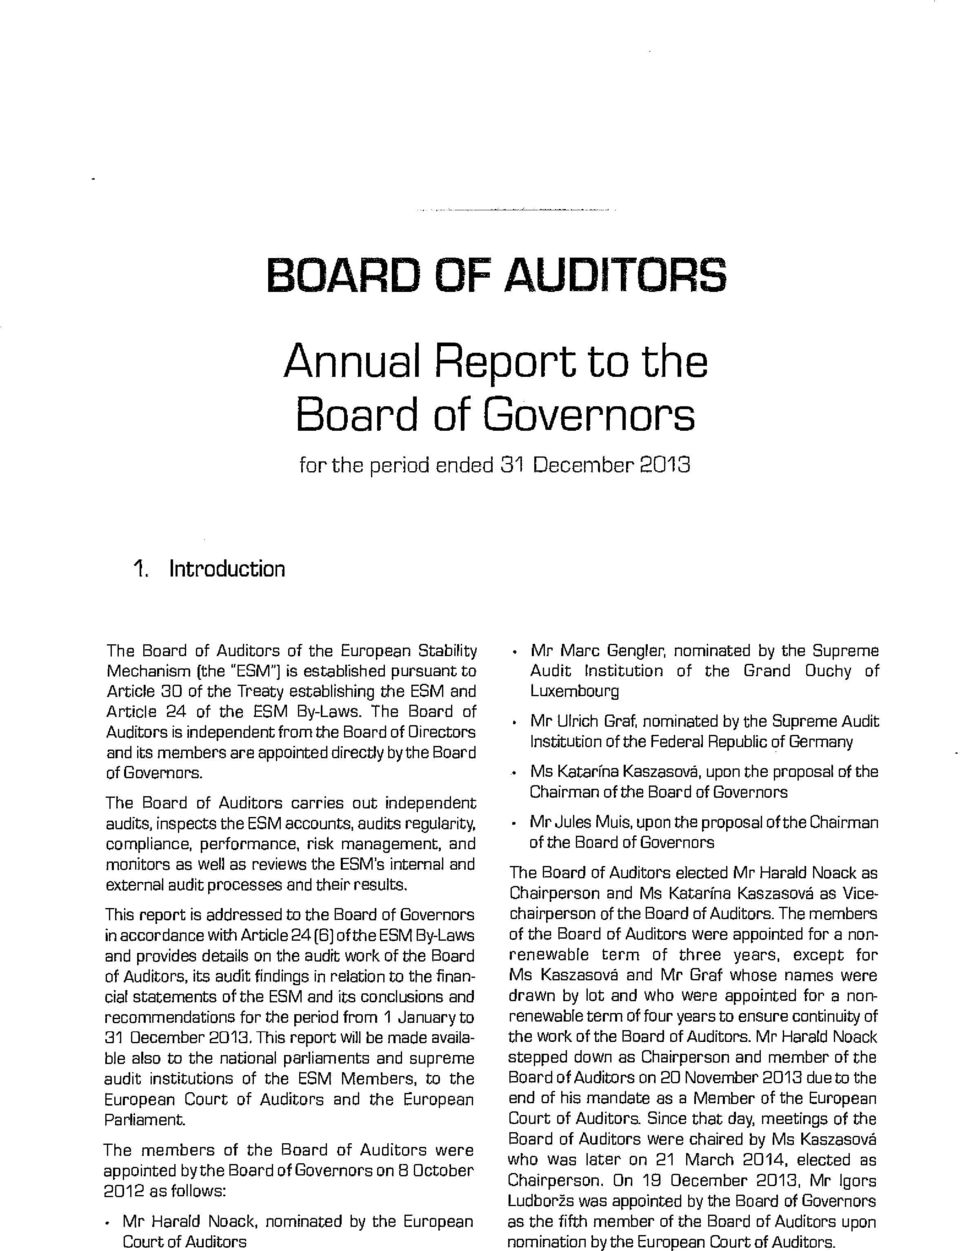 The Board of Auditors is independent from the Board of Directors and its members are appointed directly by the Board of Governors.